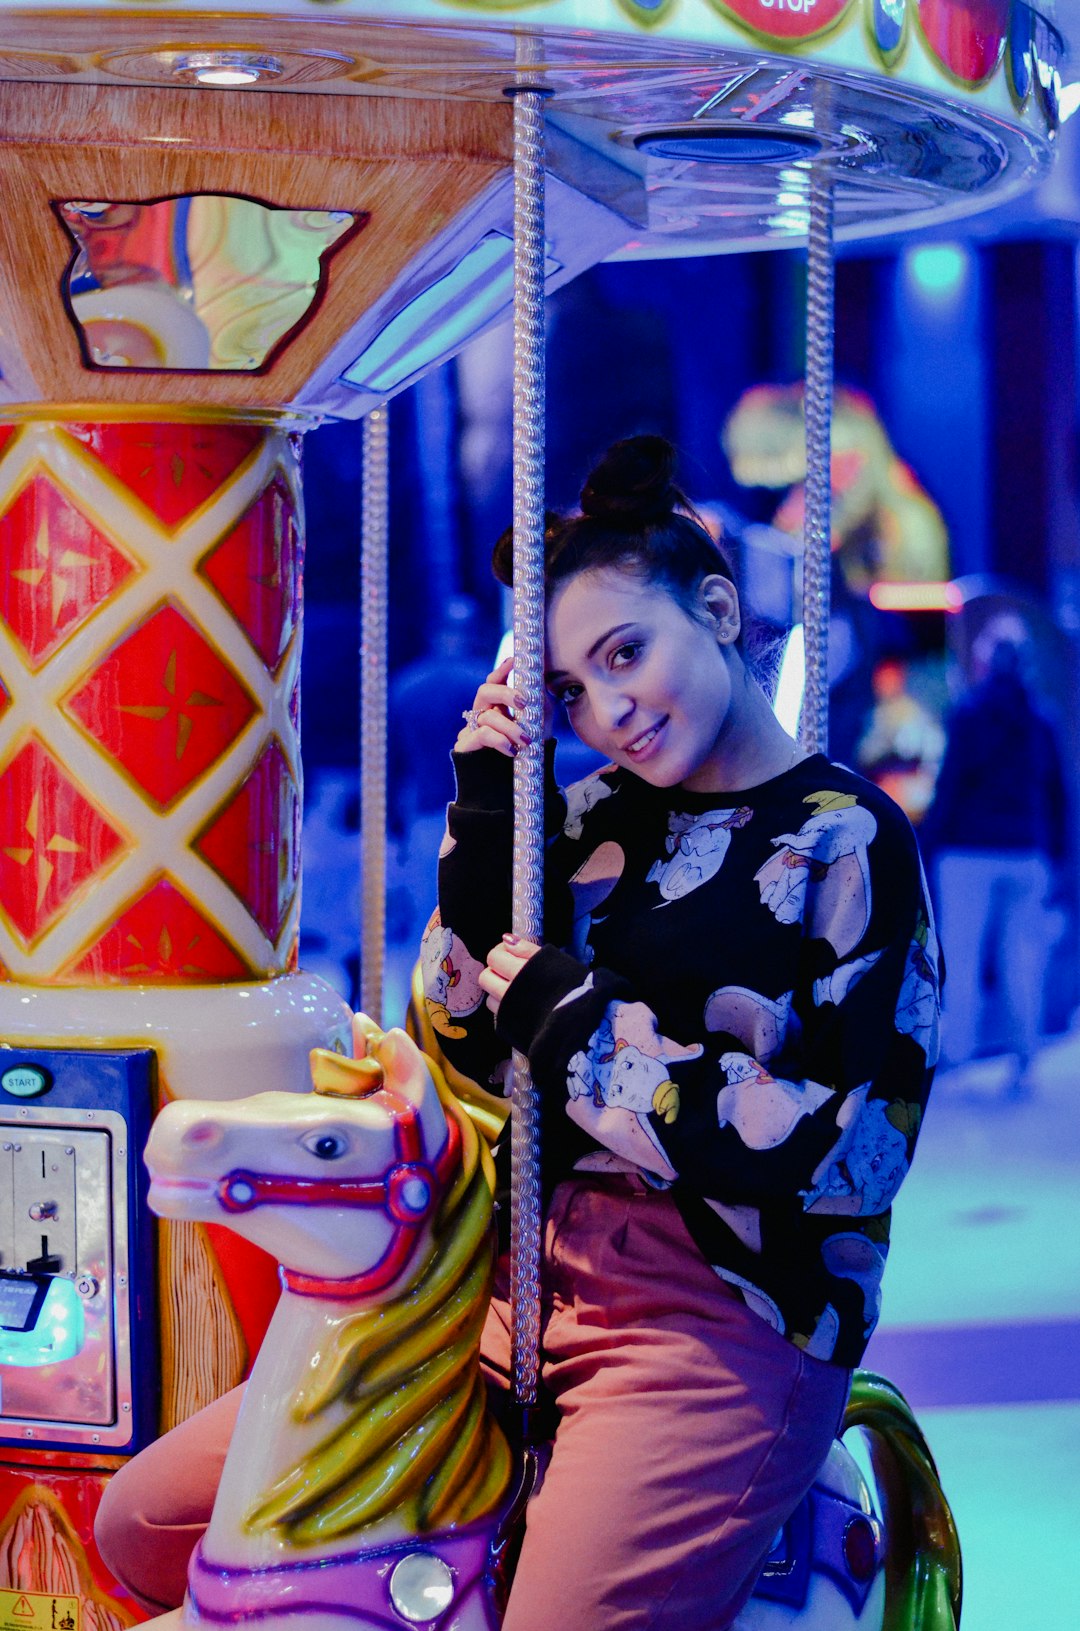 smiling woman wearing black and multicolored crew-neck sweatshirt sitting on carousel ride